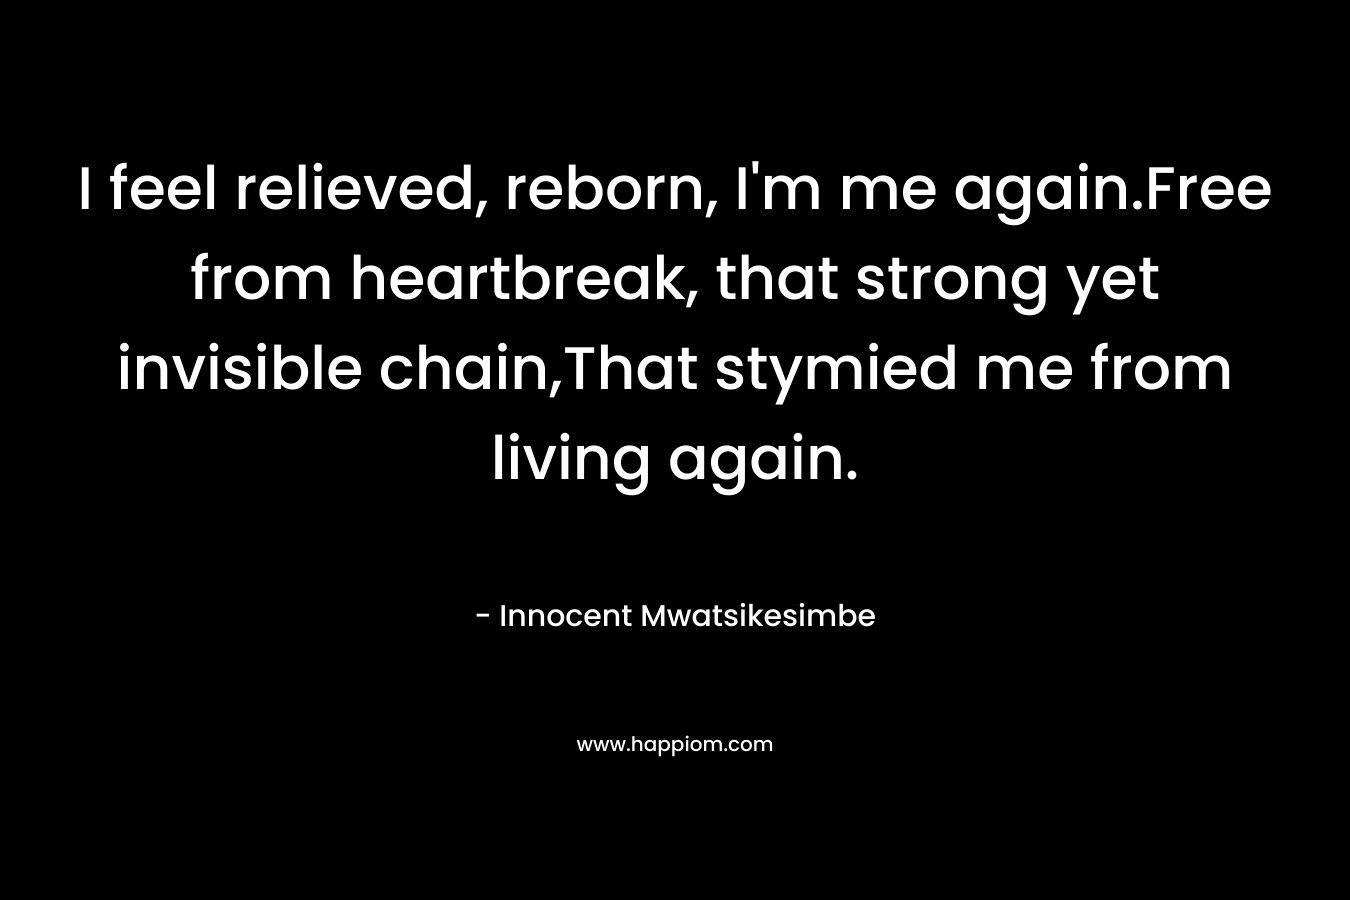 I feel relieved, reborn, I'm me again.Free from heartbreak, that strong yet invisible chain,That stymied me from living again.